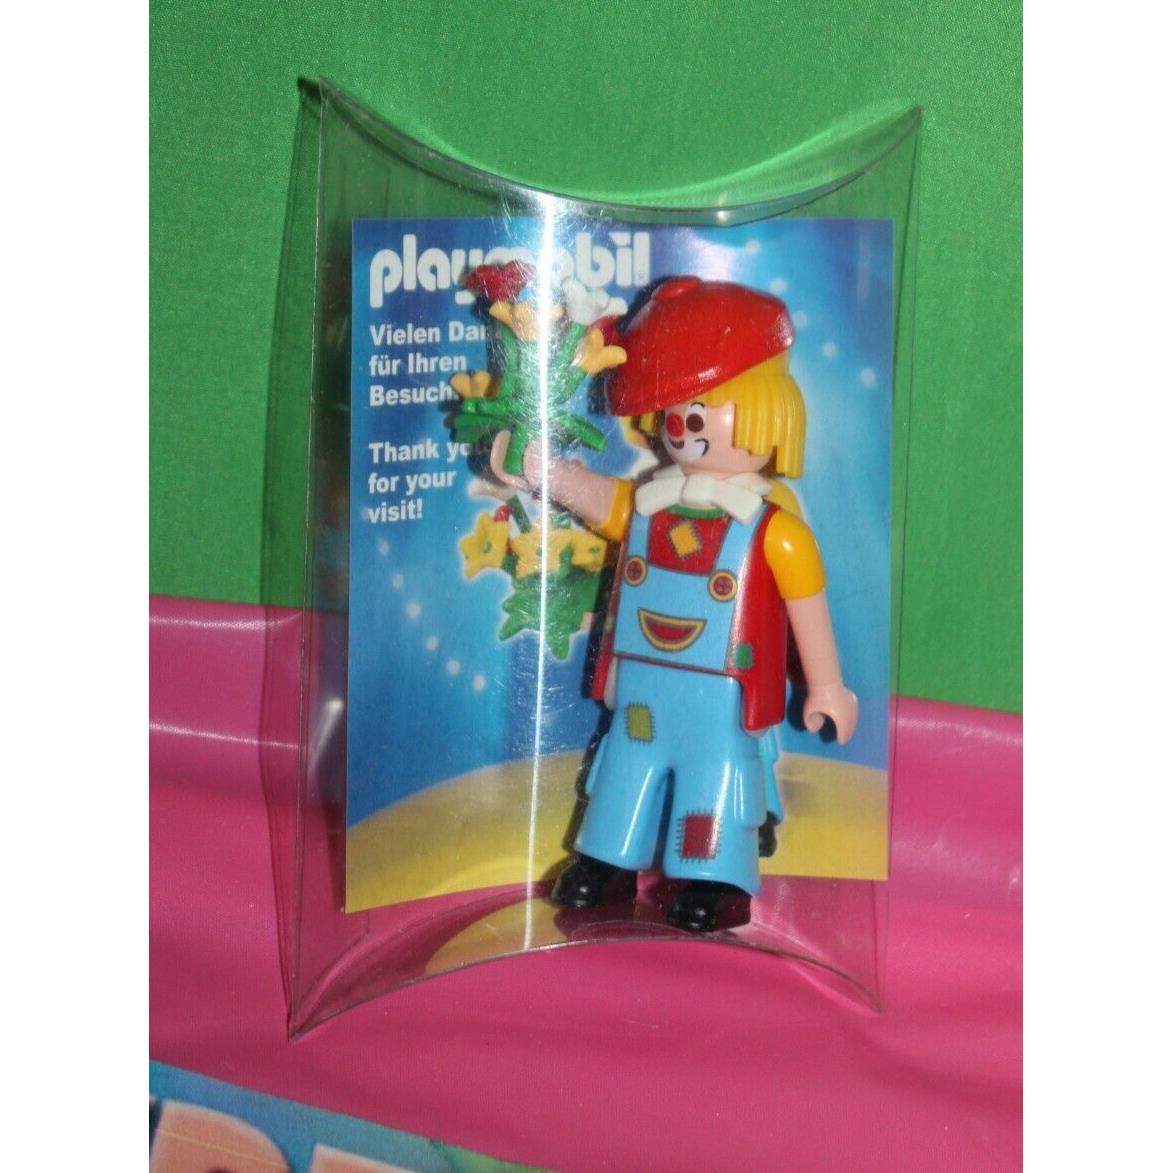 Playmobil Germany Clown with Flower Figurine Promo Toy In Package Toy Fair 07